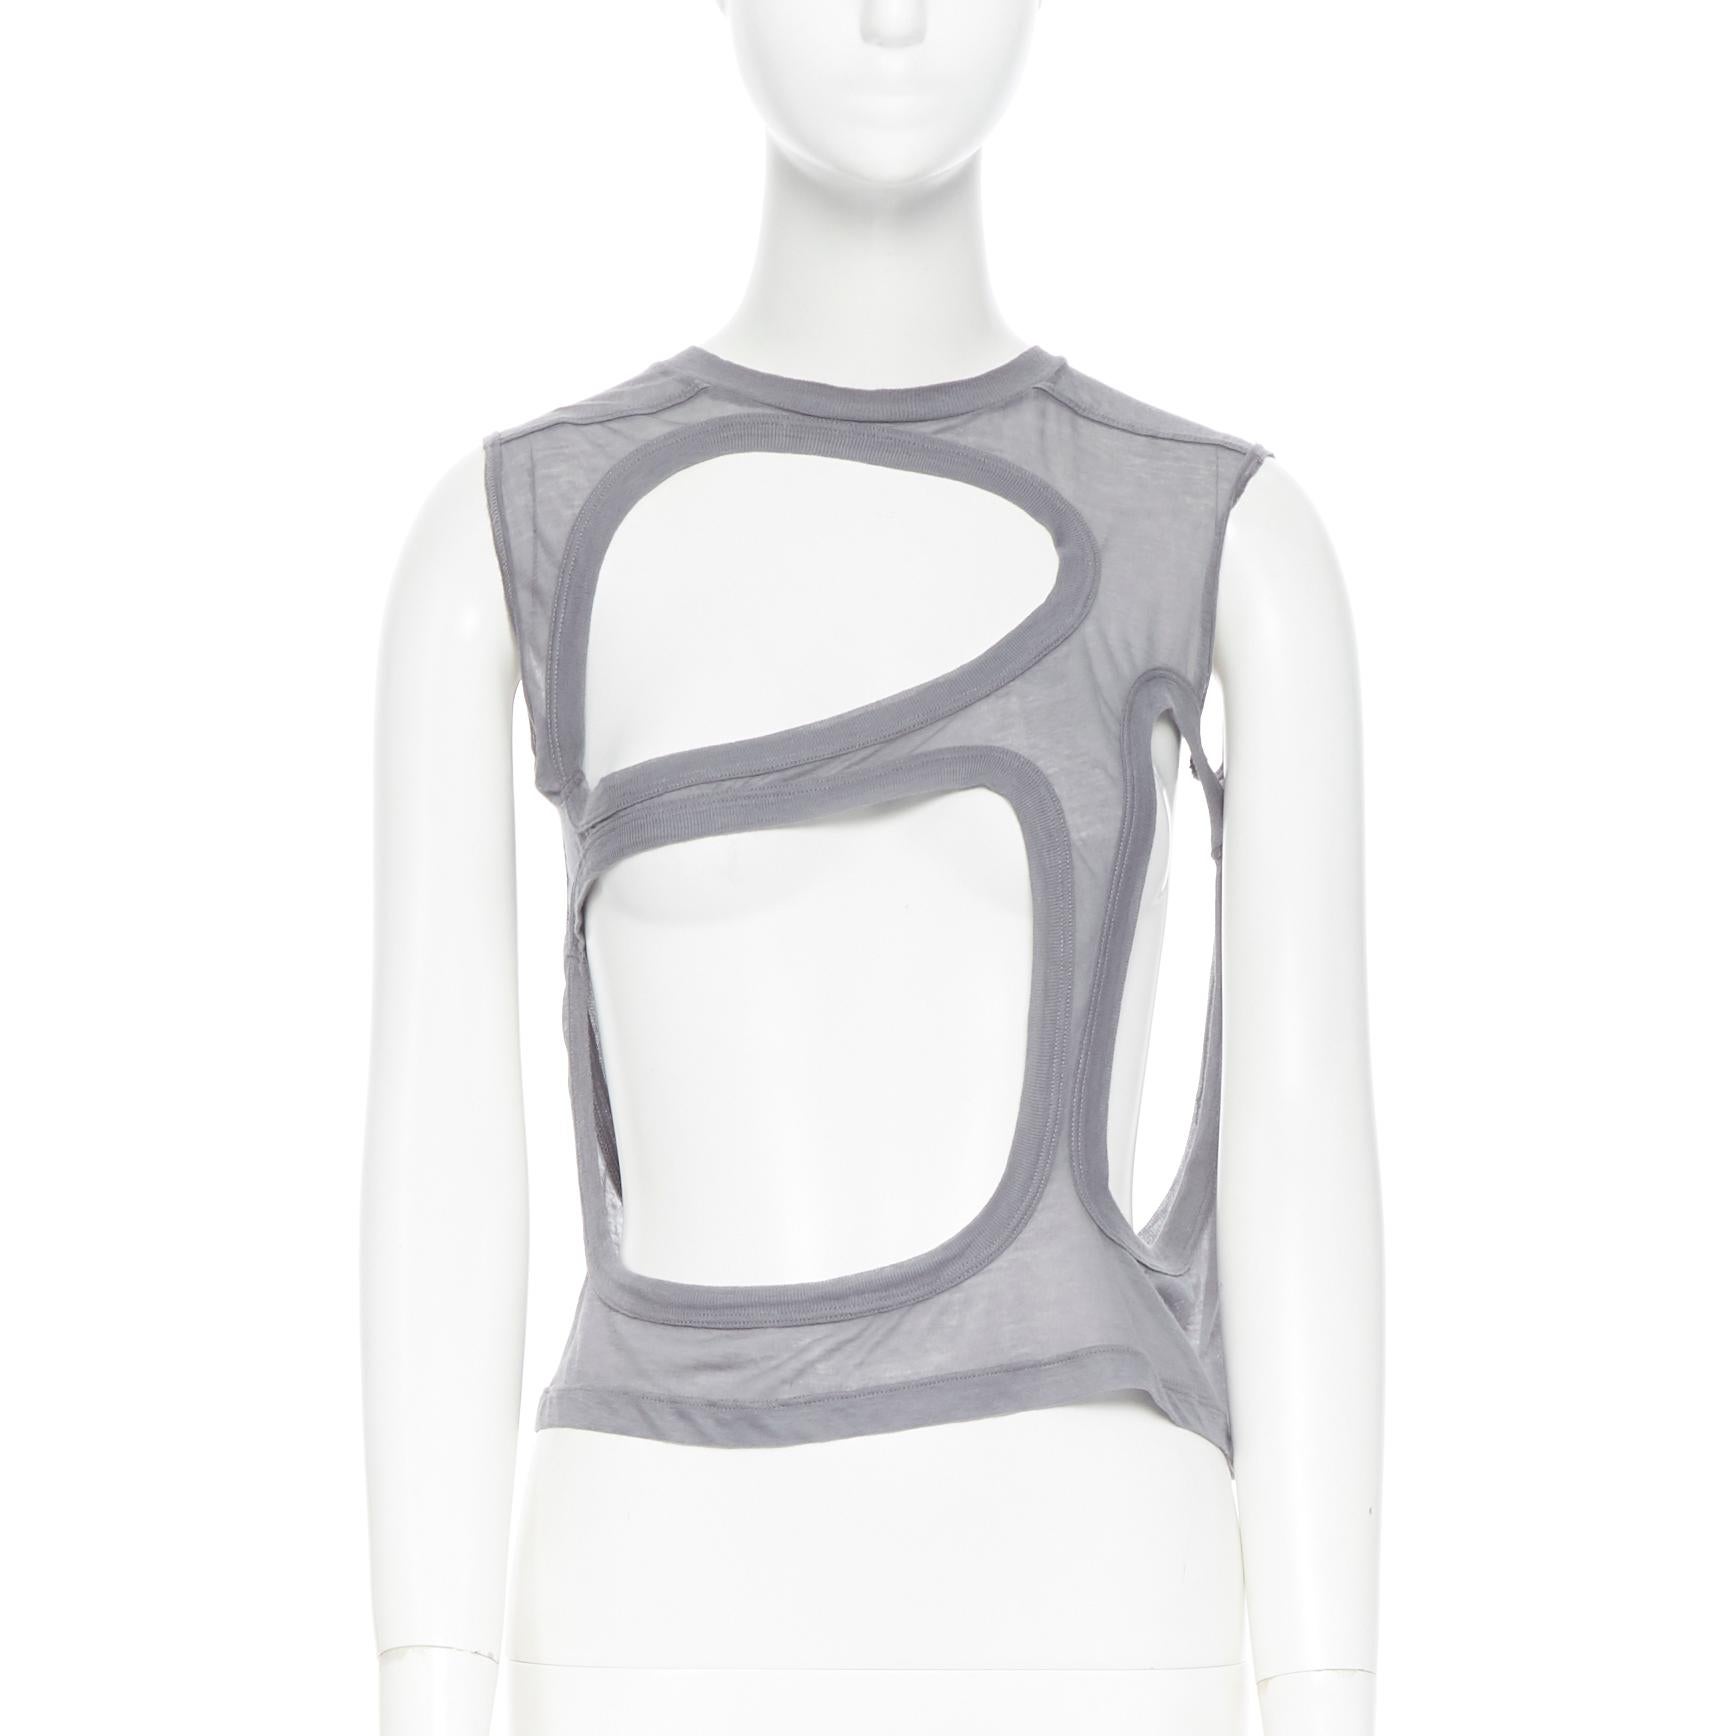 new RICK OWENS SS18 Dirt Membrane grey cotton holey cut out tank top IT38 XS
Brand: Rick Owens
Designer: Rick Owens
Collection: Spring Summer 2018
Model Name / Style: Membrane top
Material: Cotton
Color: Grey
Pattern: Solid
Extra Detail: Membrane